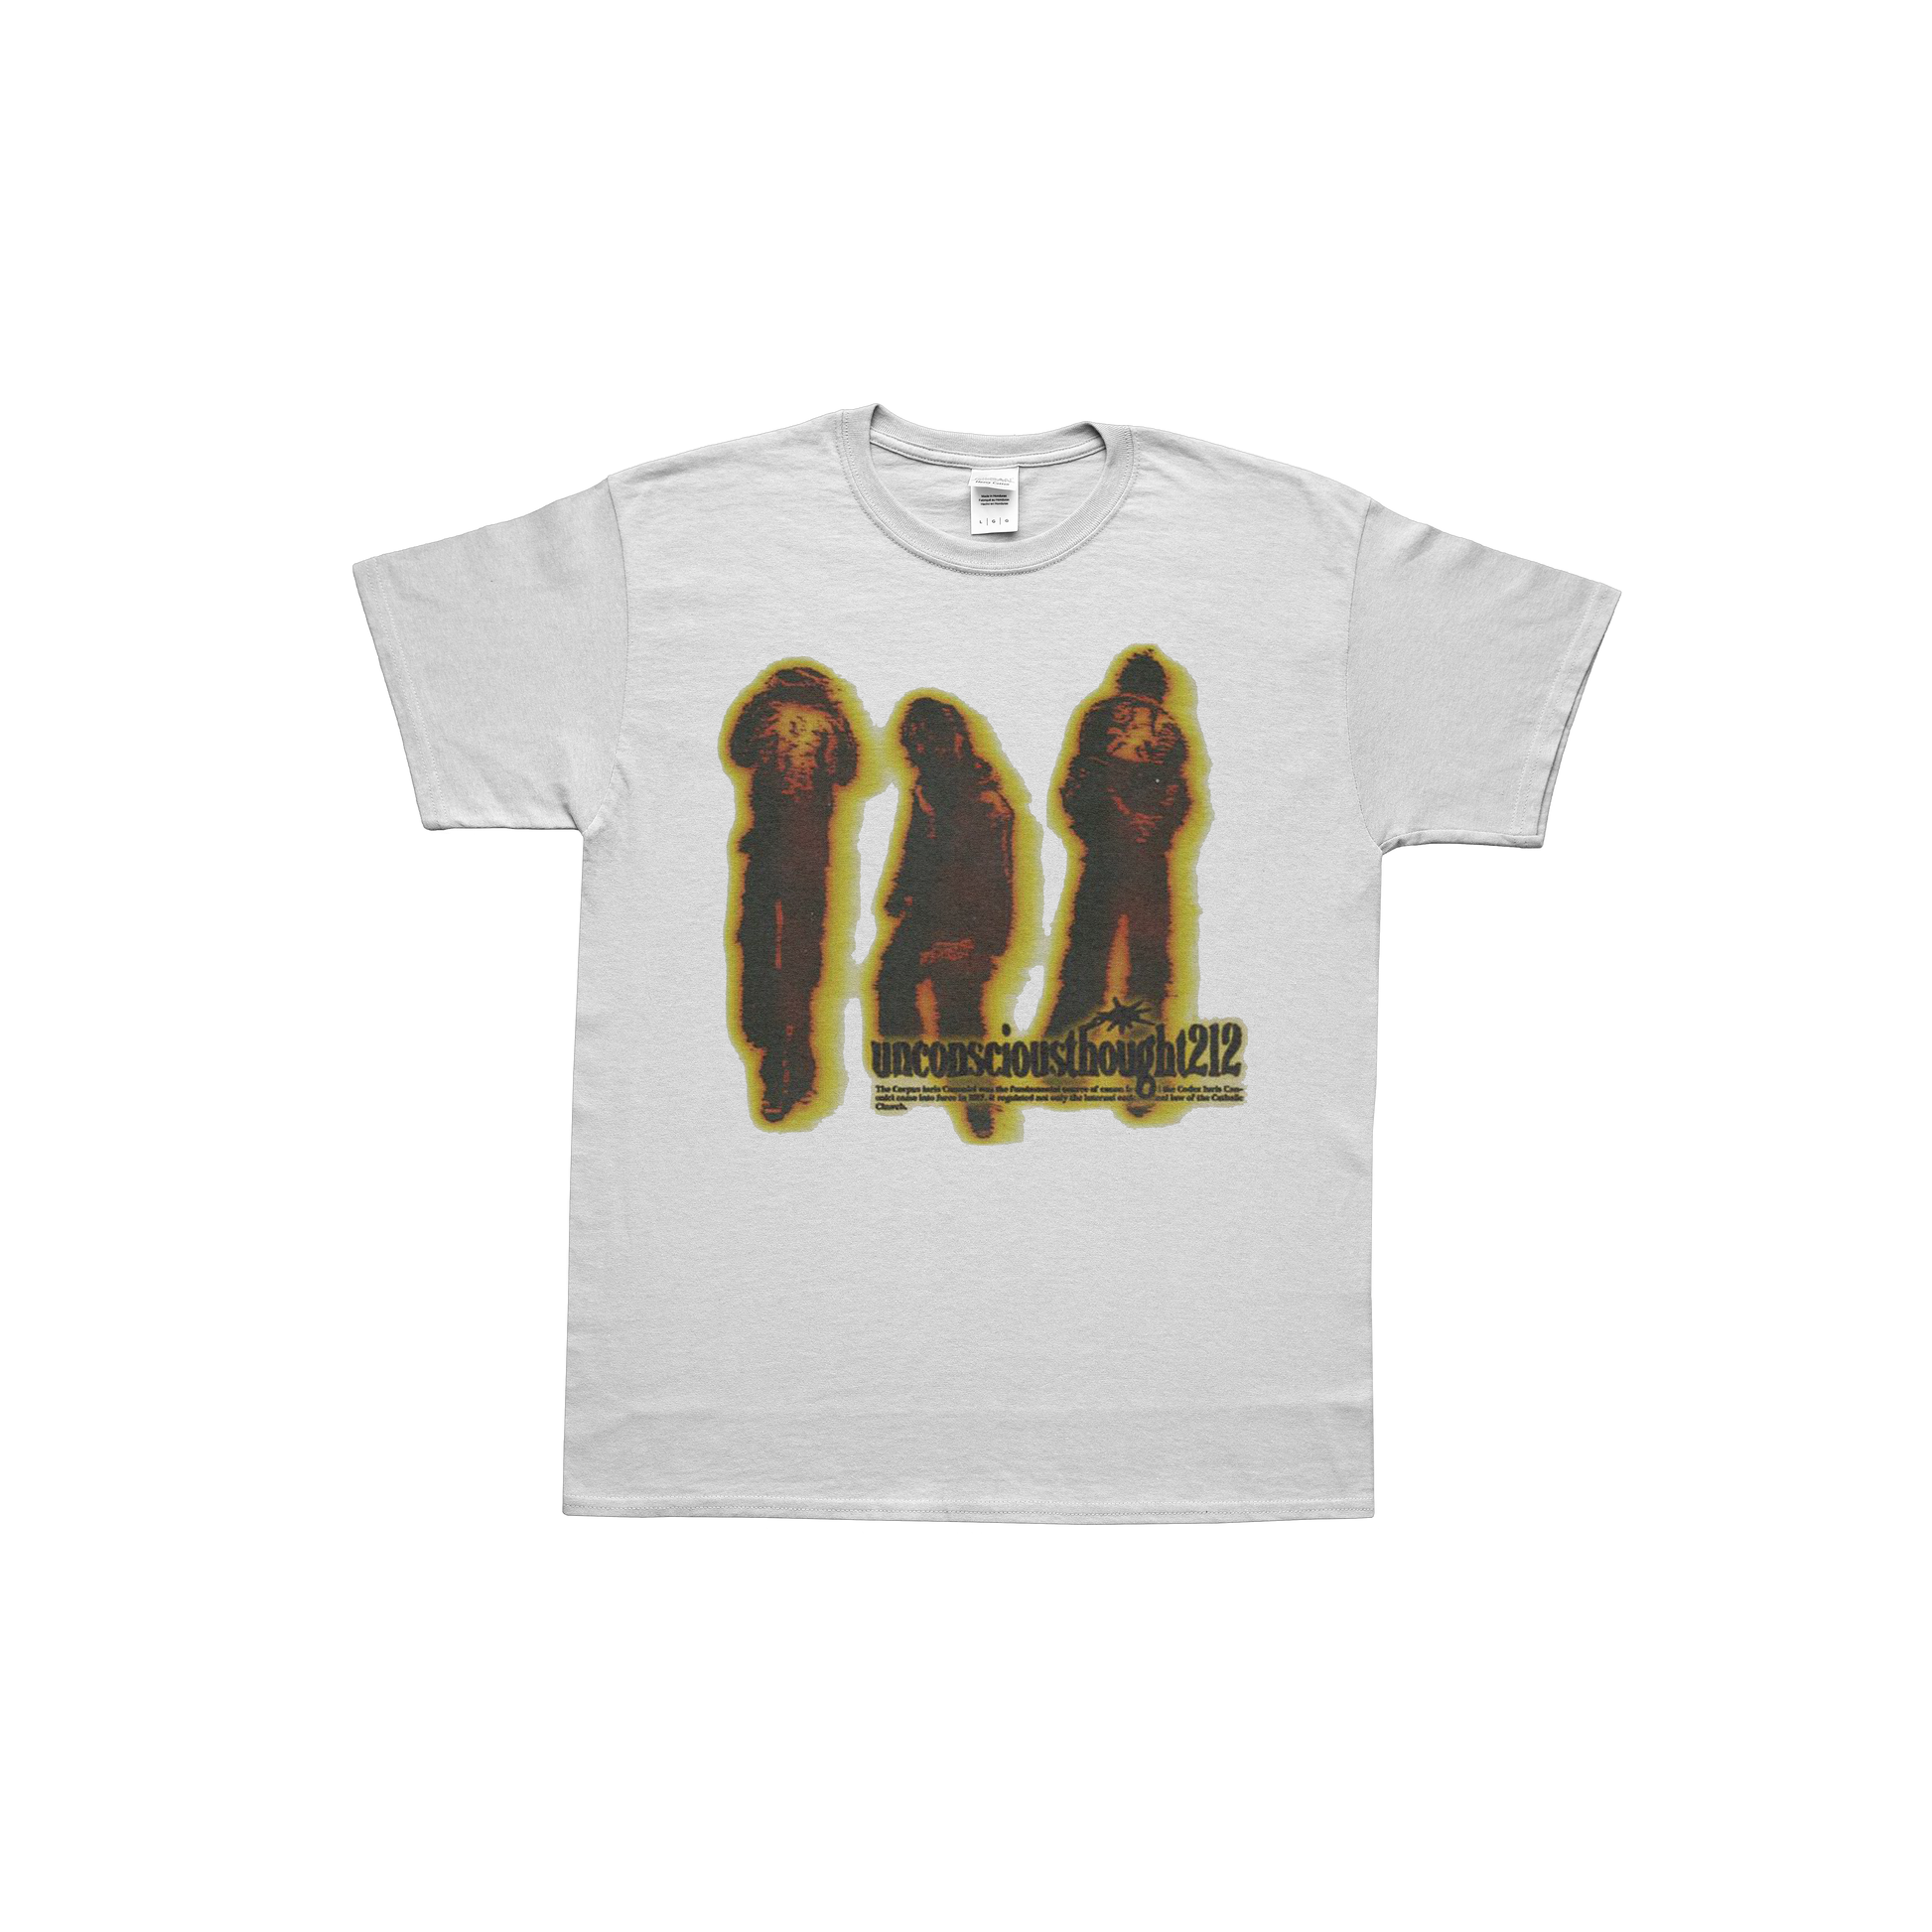 Unconscious thoughts tee – Manii